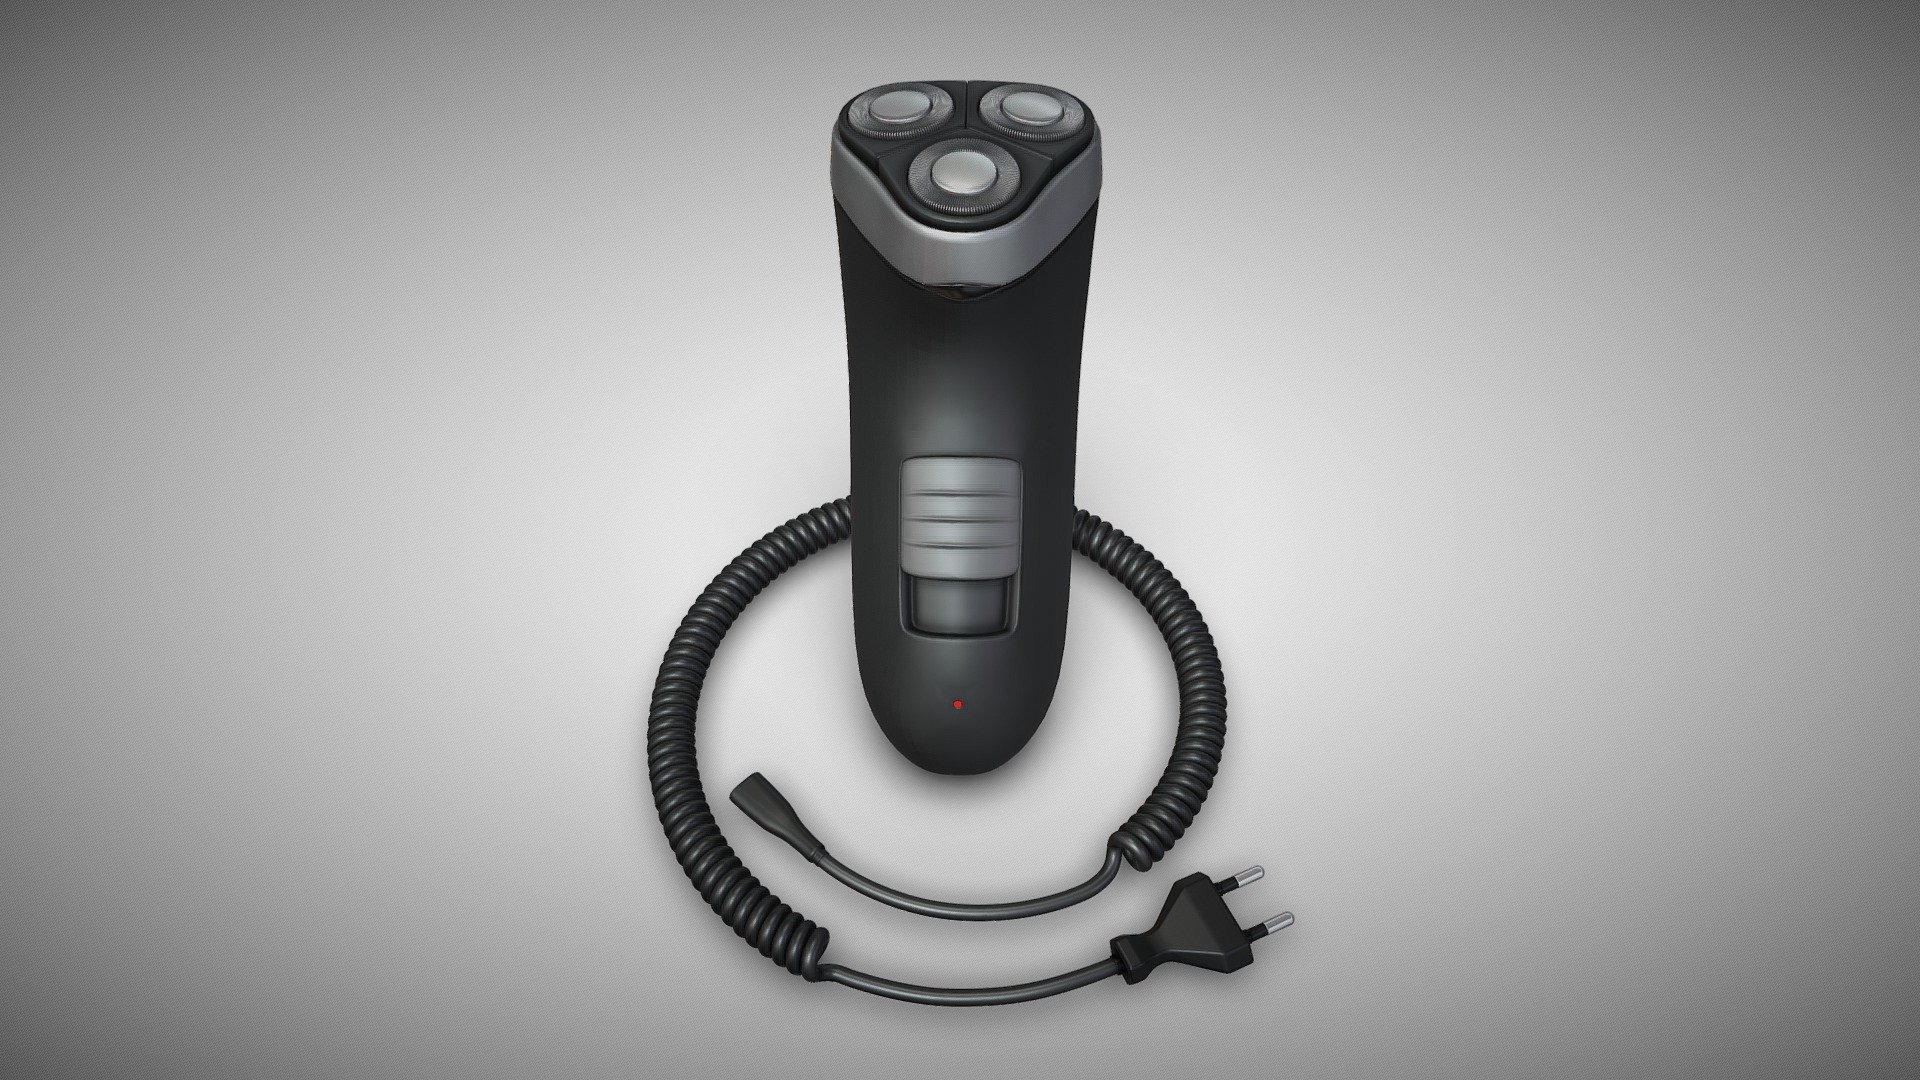 Electric Shaver  With Charging Cable
by BlockedGravity

3D Model of Electric Shaver  With Charging Cable Plus Charging Cable.


Available Formats:

* .c4d, *.fbx, 
* .3ds, *.obj, 
*.mtl
 - Electric Shaver  With Charging Cable - Buy Royalty Free 3D model by BlockedGravity 3d model